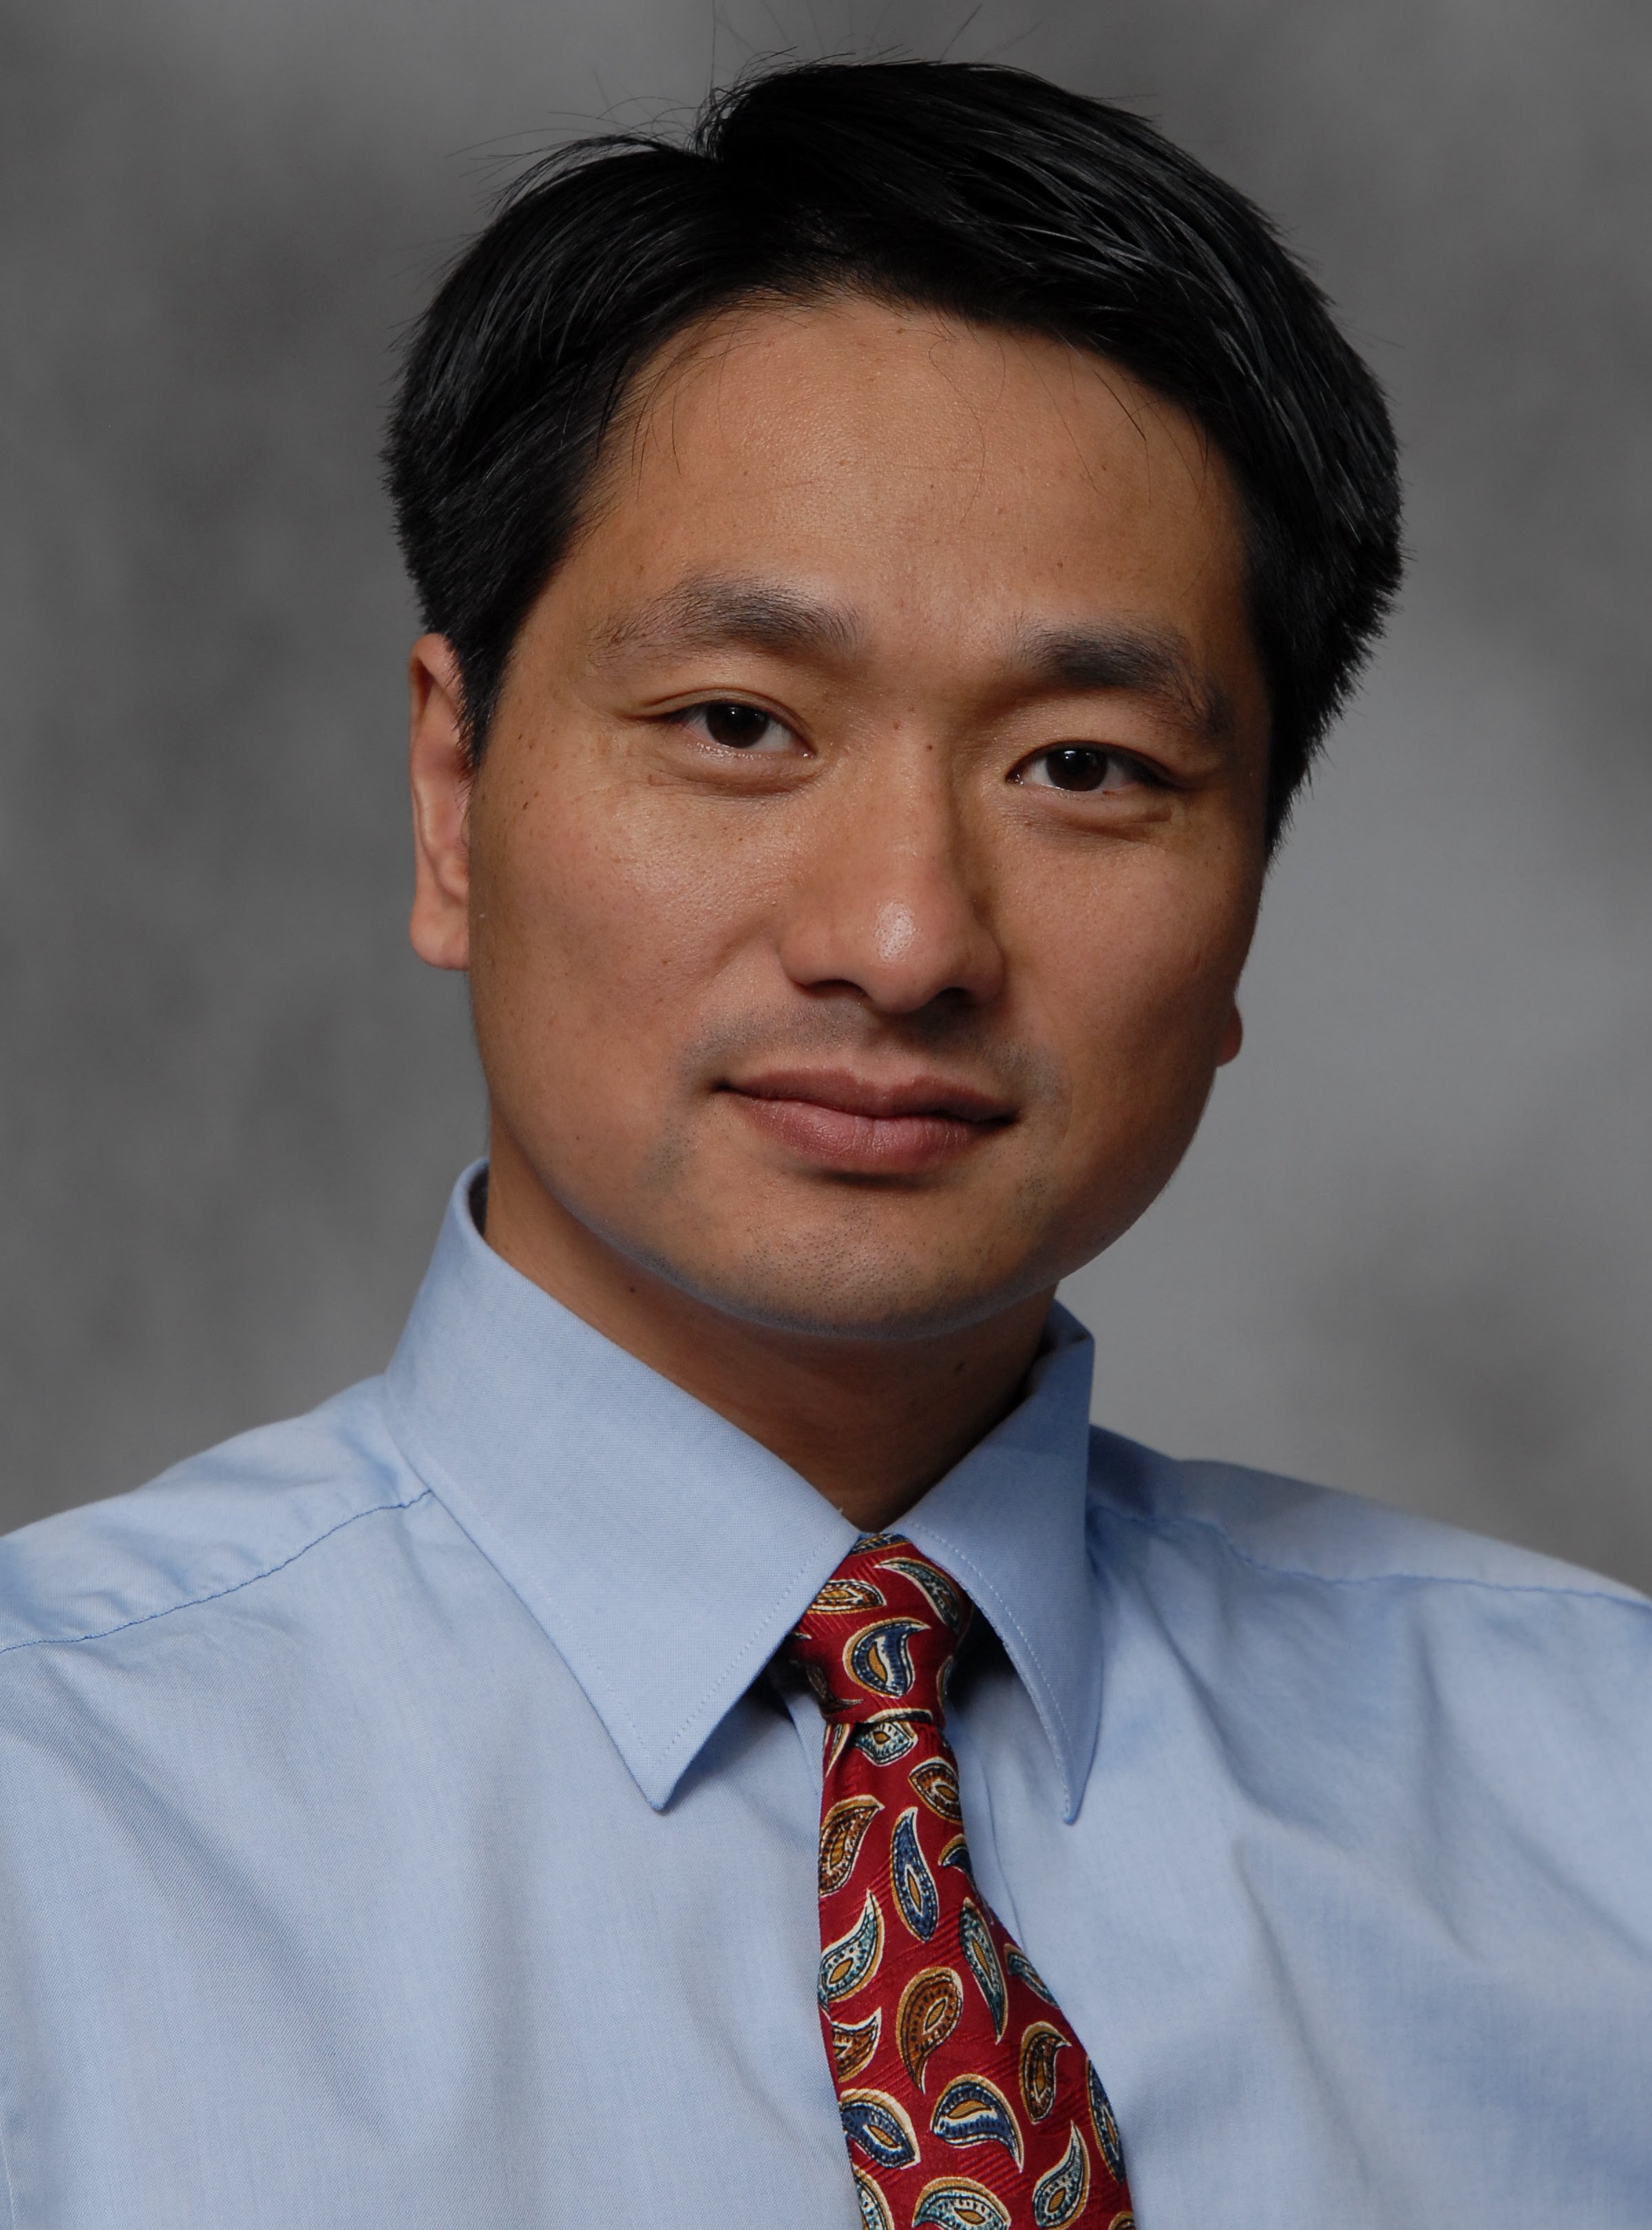 Headshot of Dr. Changquan Calvin Sun wearing a light blue collared shirt and red tie.